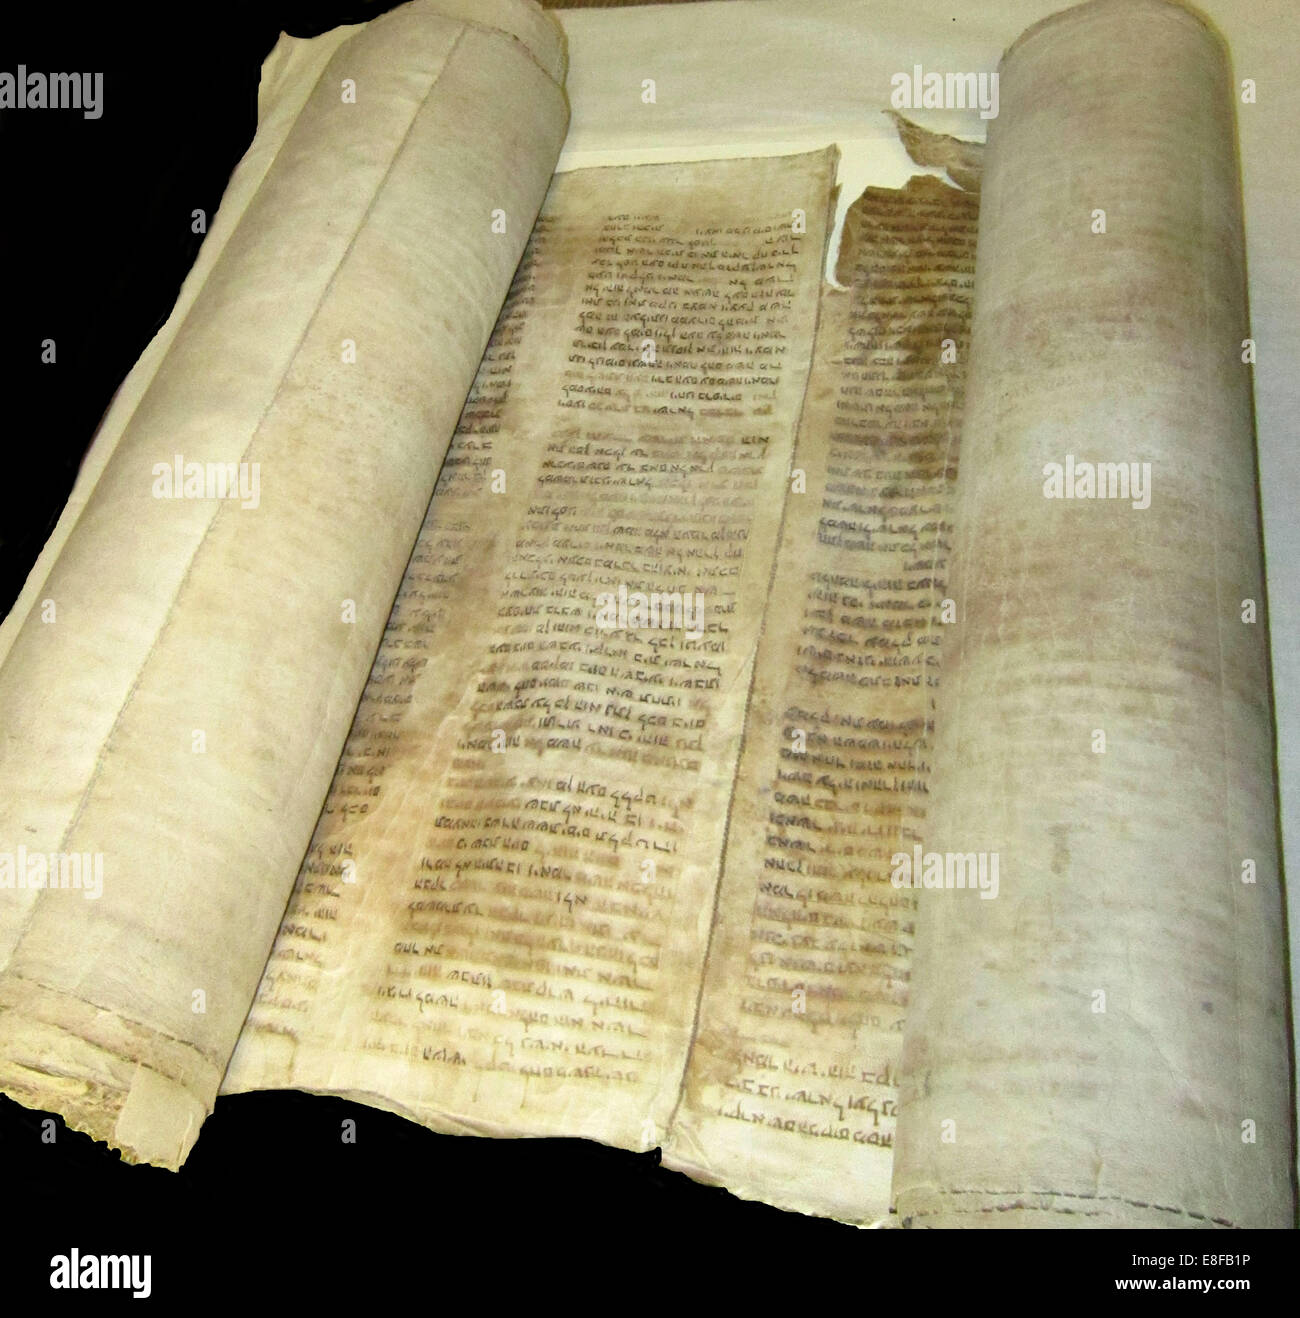 Torah scroll of the Jewish community in Kaifeng, China. Artist: Historical Document Stock Photo